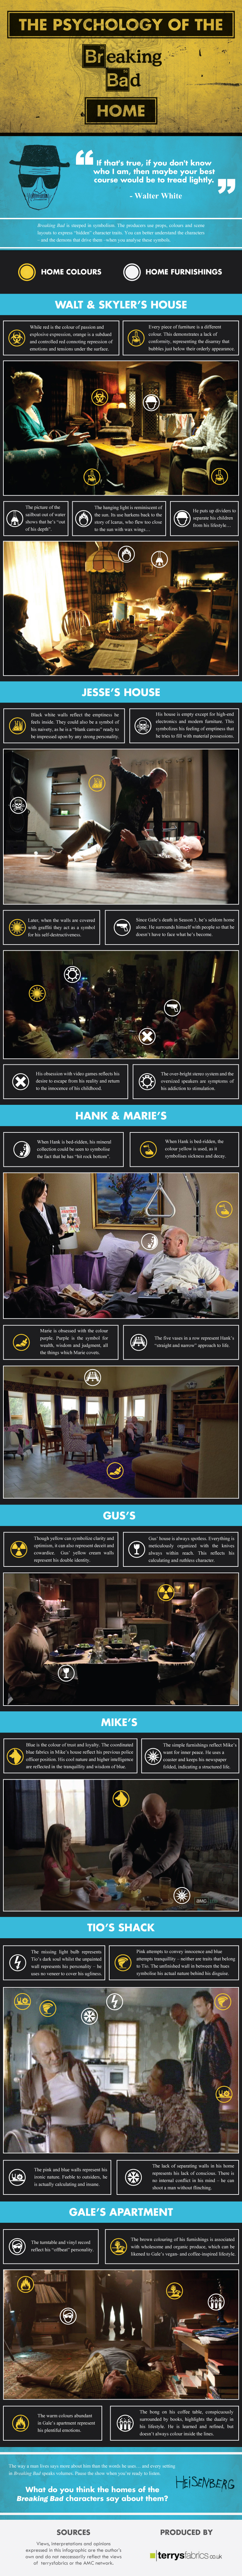 The Psychology of the Breaking Bad Home